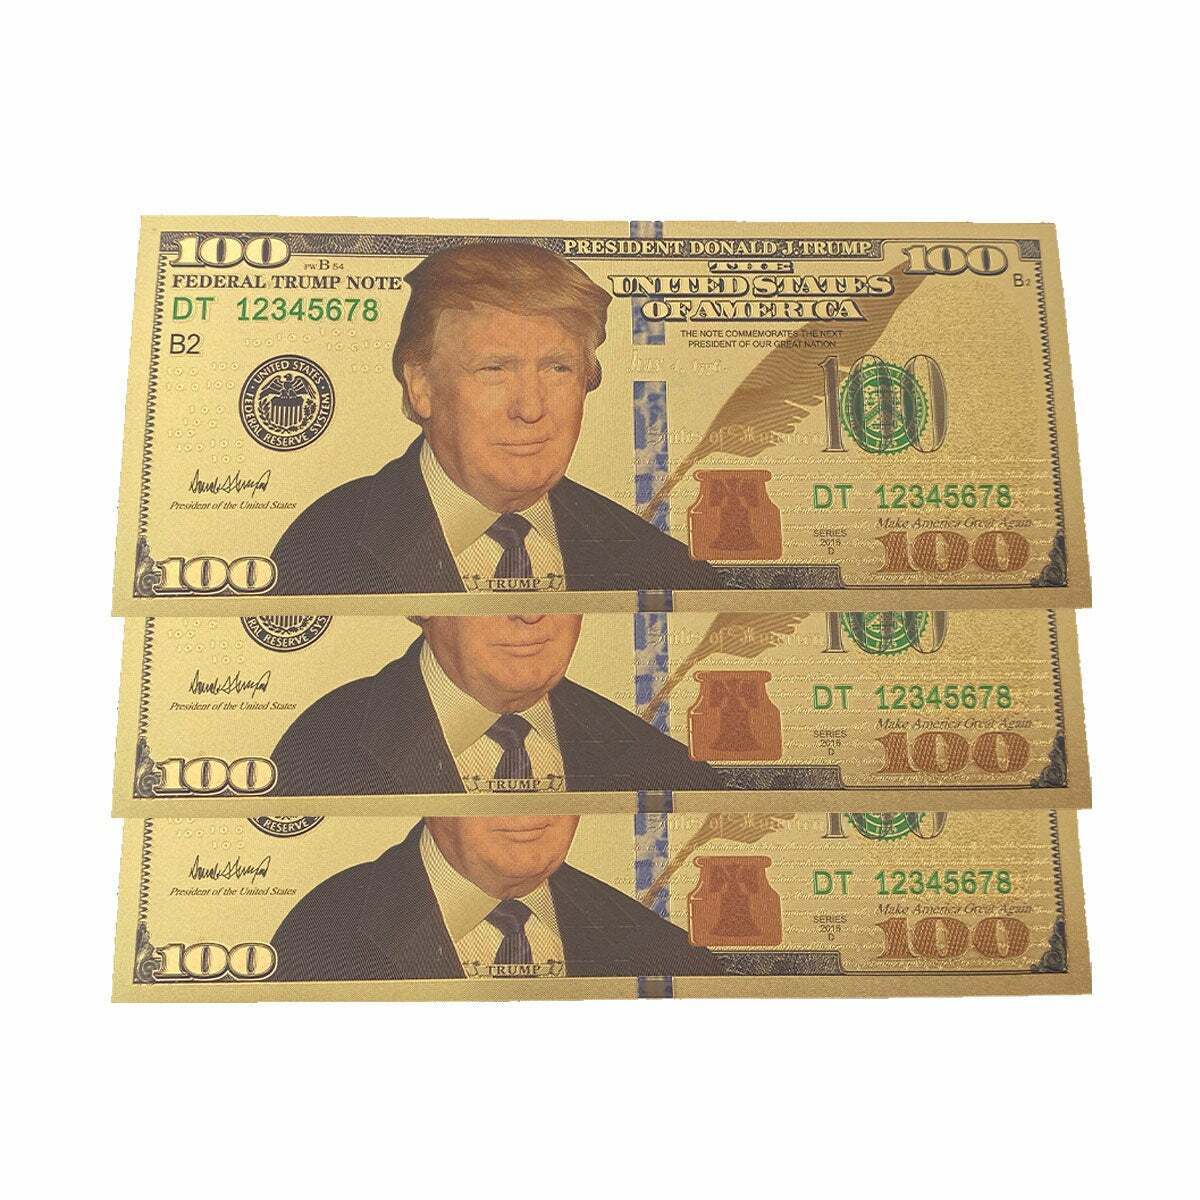 DONALD TRUMP AUTHENTIC 24KT GOLD PLATED COMMEMORATIVE $100 BANK NOTE (3PK)